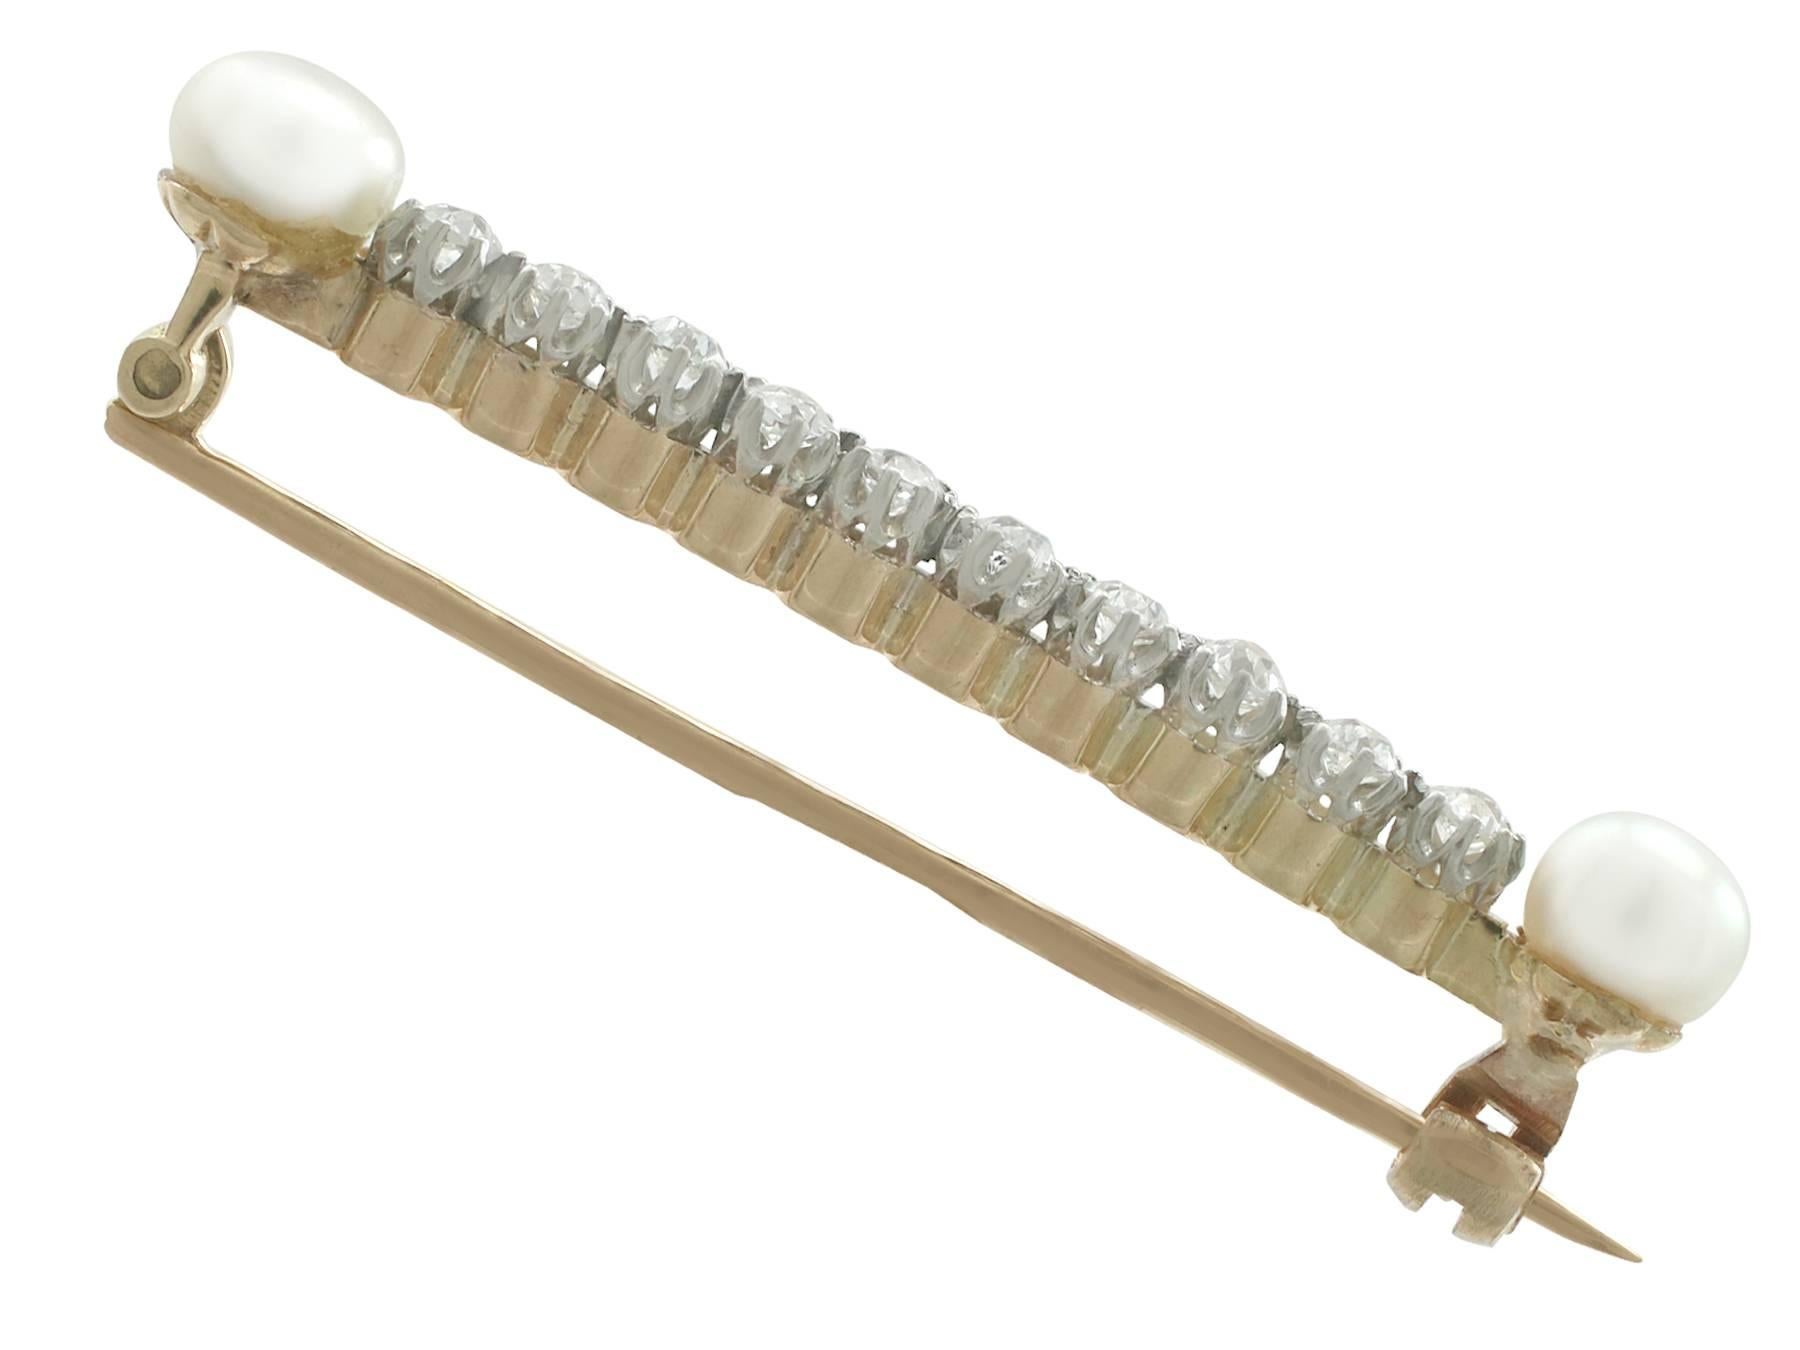 An impressive antique 0.60 carat diamond and pearl, 15 karat yellow gold and platinum set bar brooch; part of our diverse pearl jewelry collections.

This fine and impressive diamond bar brooch with pearls has been crafted in 15 k yellow gold with a